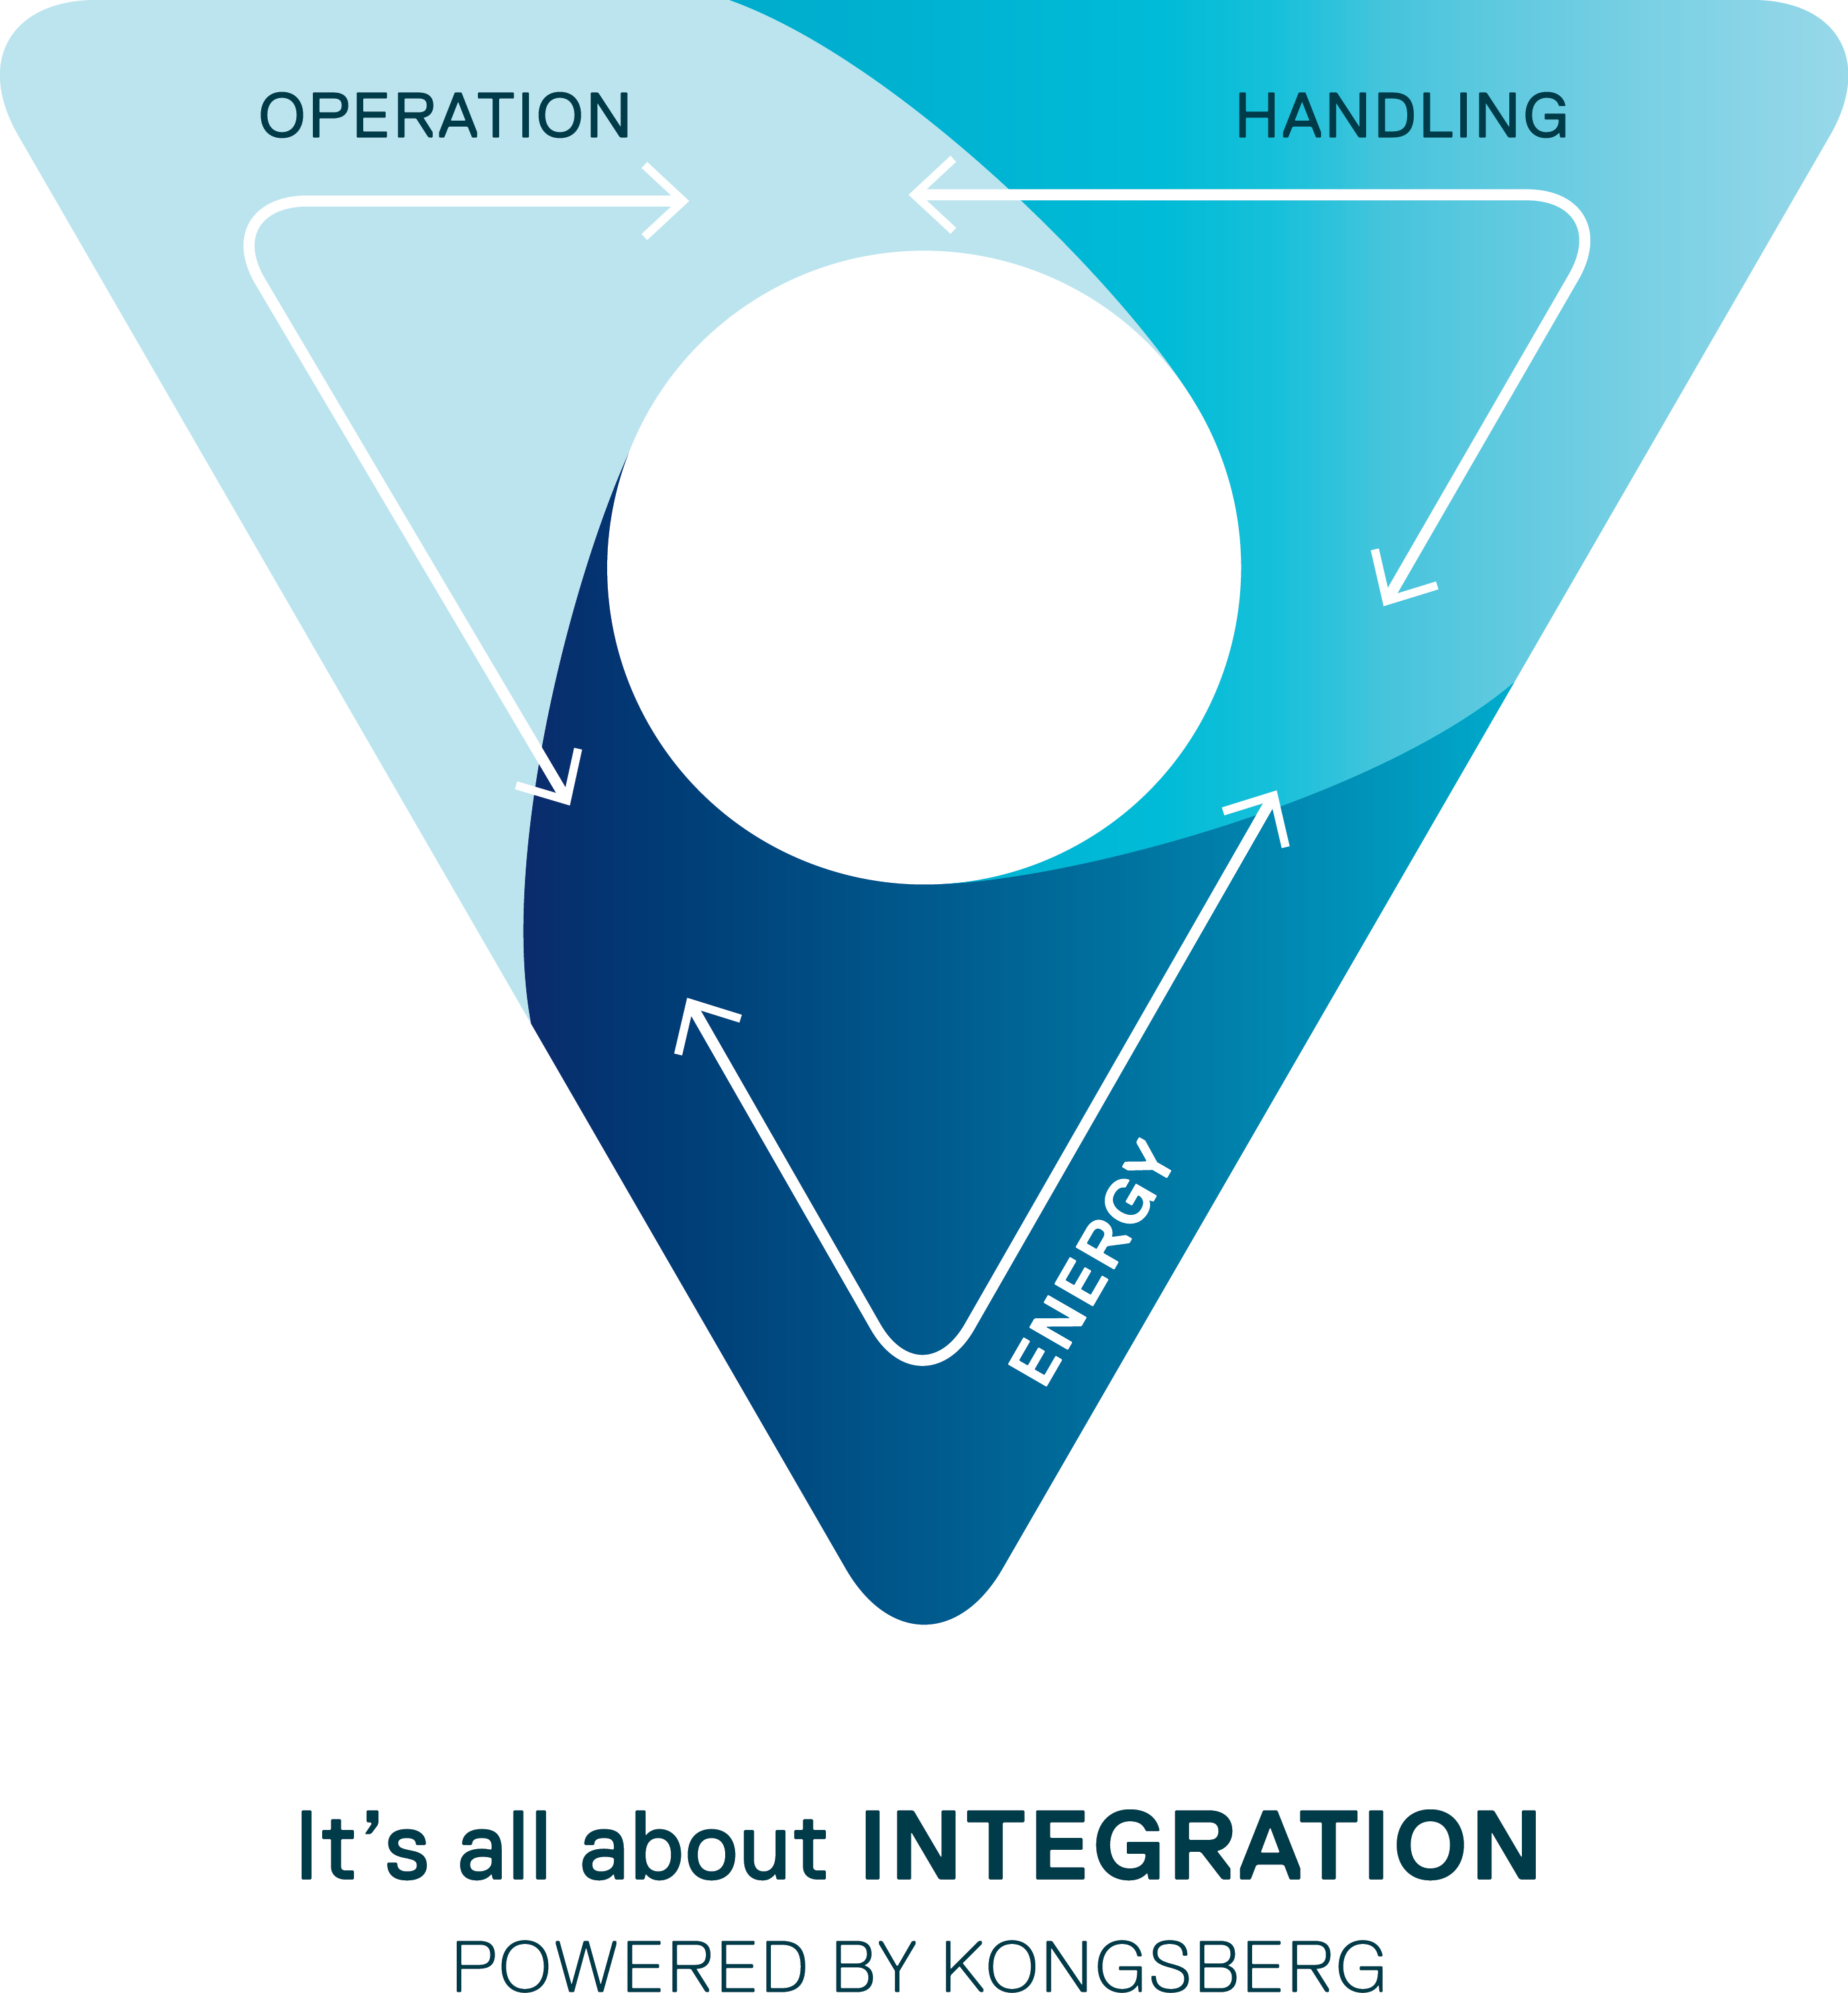 5KM ONS 2016 Integration Triangle